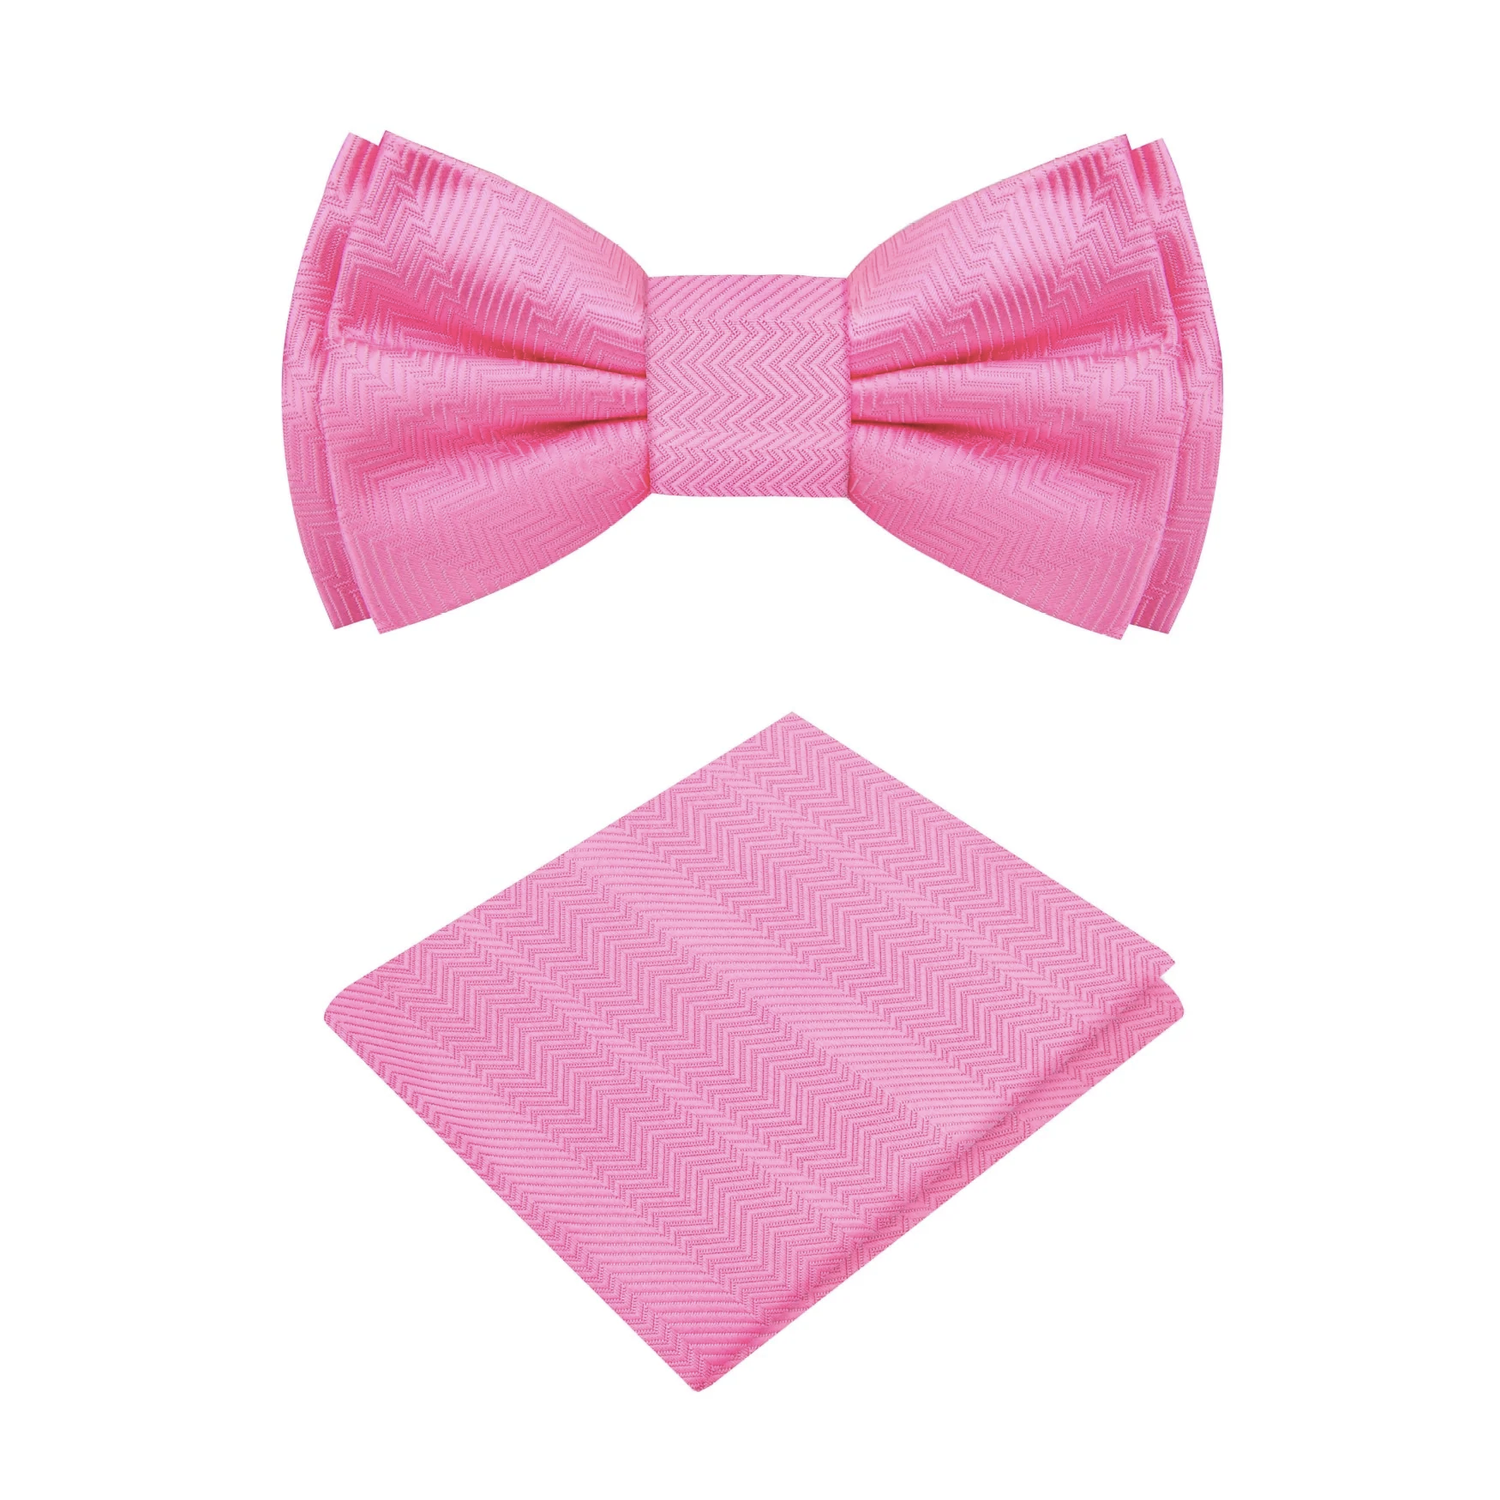 A Real Pink Solid Pattern Self Tie Bow Tie, Matching Pocket Square